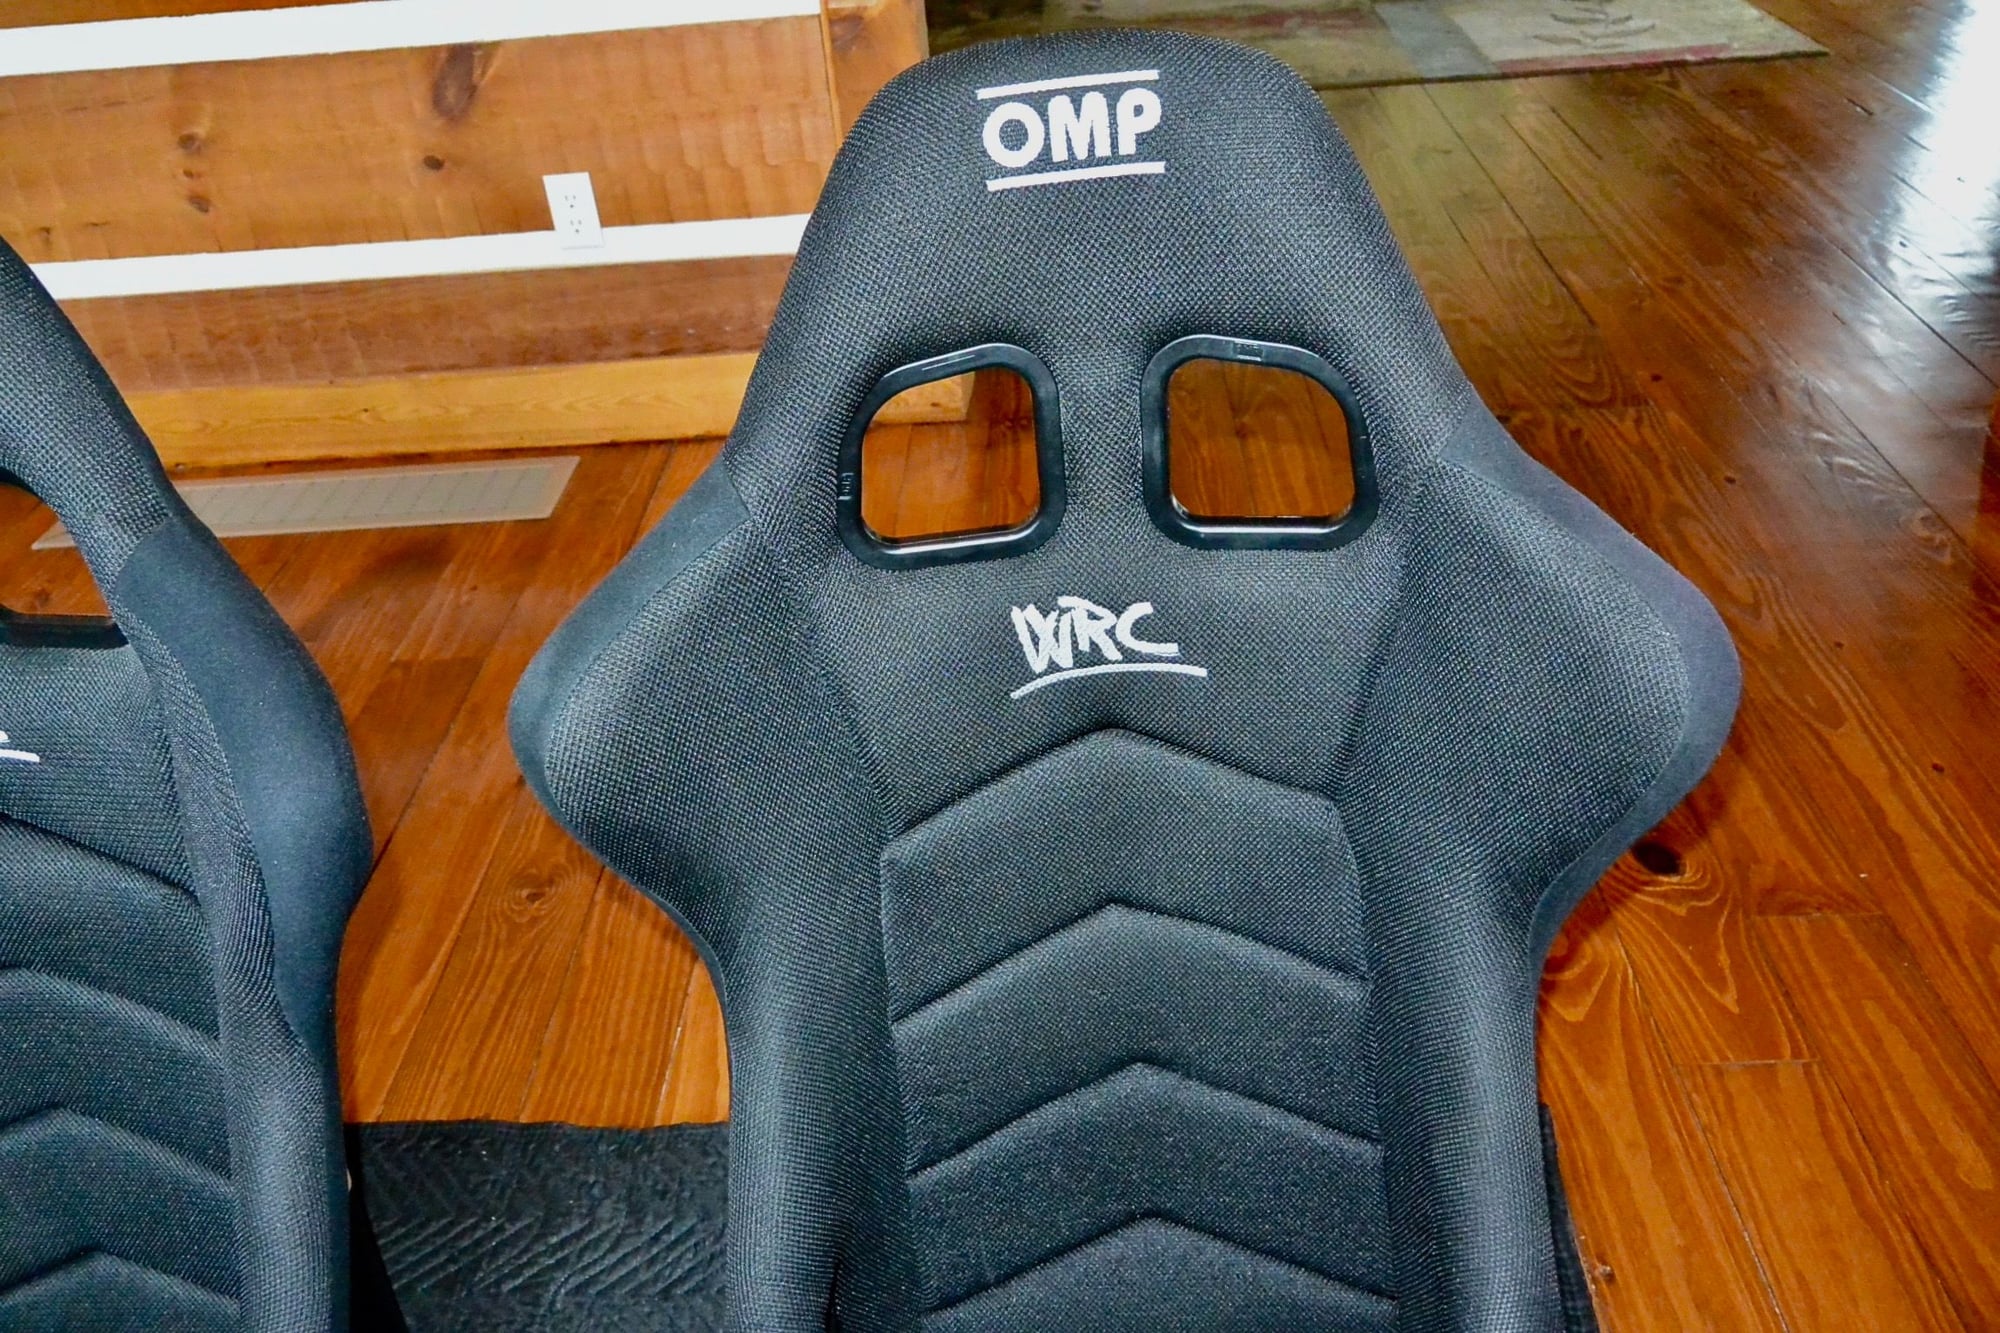 Interior/Upholstery - OMP WRC Race Seats + Planted Seat Brackets for 996/997/991/Boxster/Cayman - ship incl - Used - 2004 to 2019 Porsche GT3 - 1999 to 2019 Porsche 911 - 1999 to 2019 Porsche Boxster - 1999 to 2019 Porsche Cayman - Cheyenne, WY 82009, United States